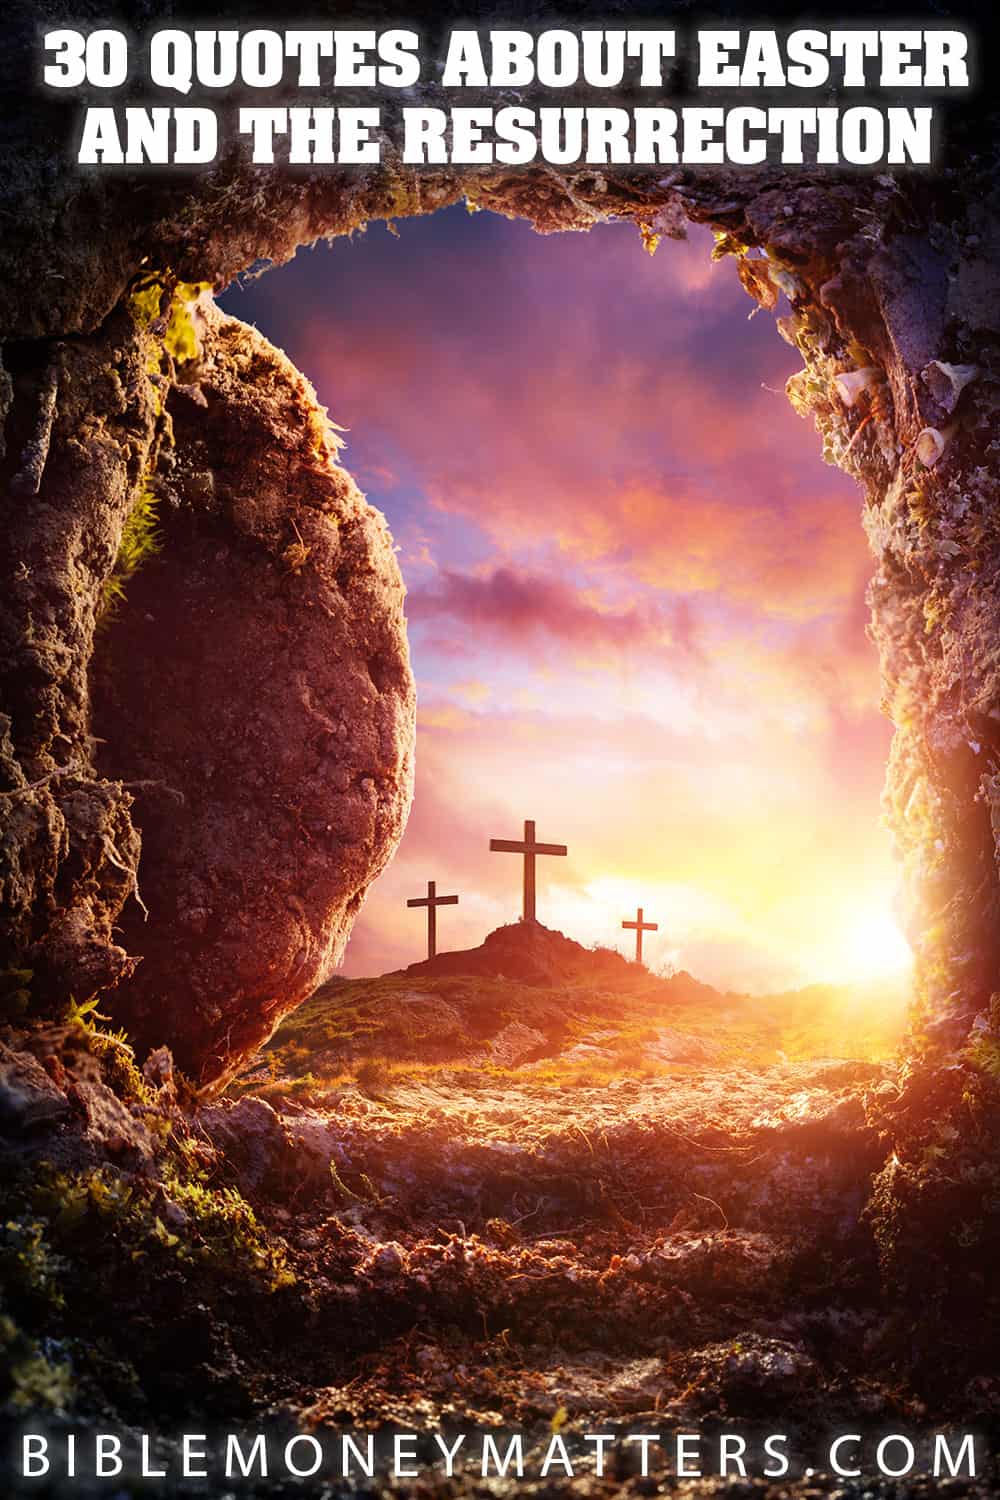 30 Quotes About Easter And Resurrection: He Is Risen!